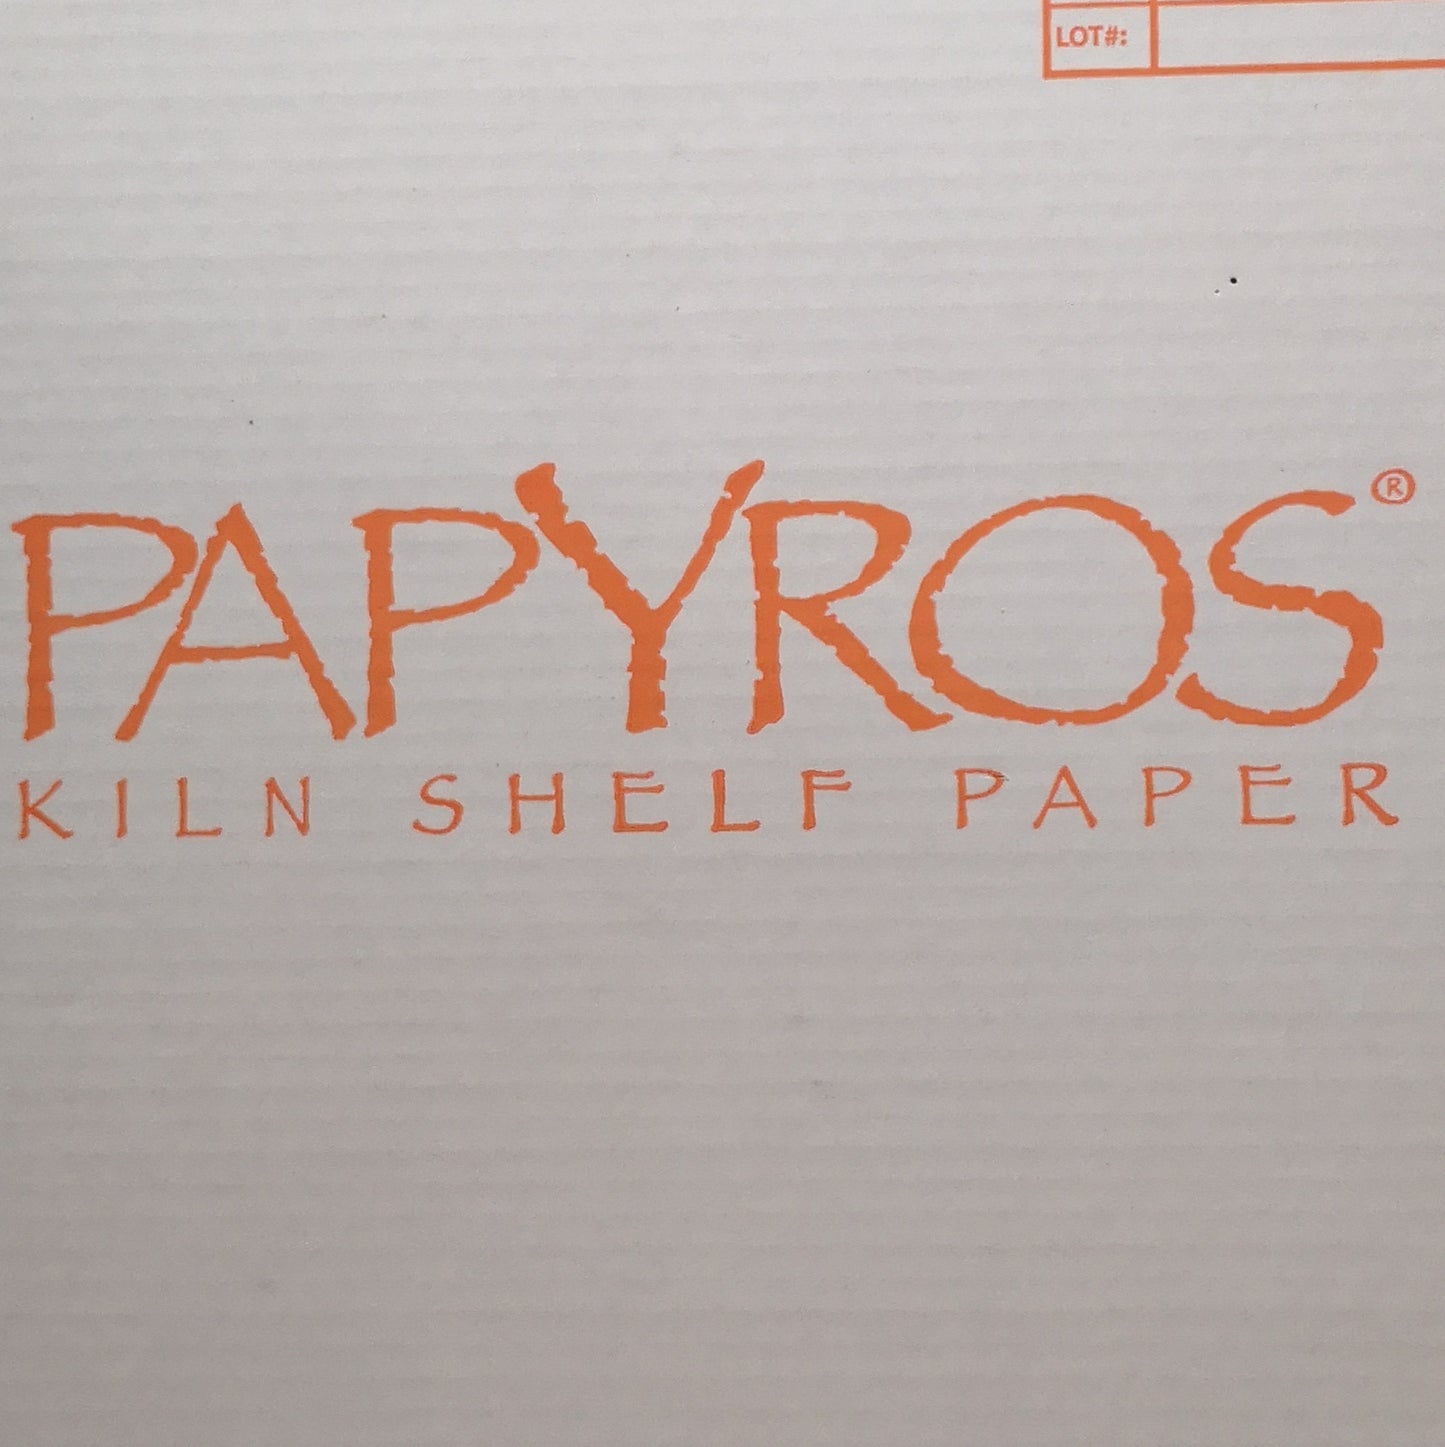 Papyros Kiln Shelf Paper 20.5” Wide - Sold by the foot